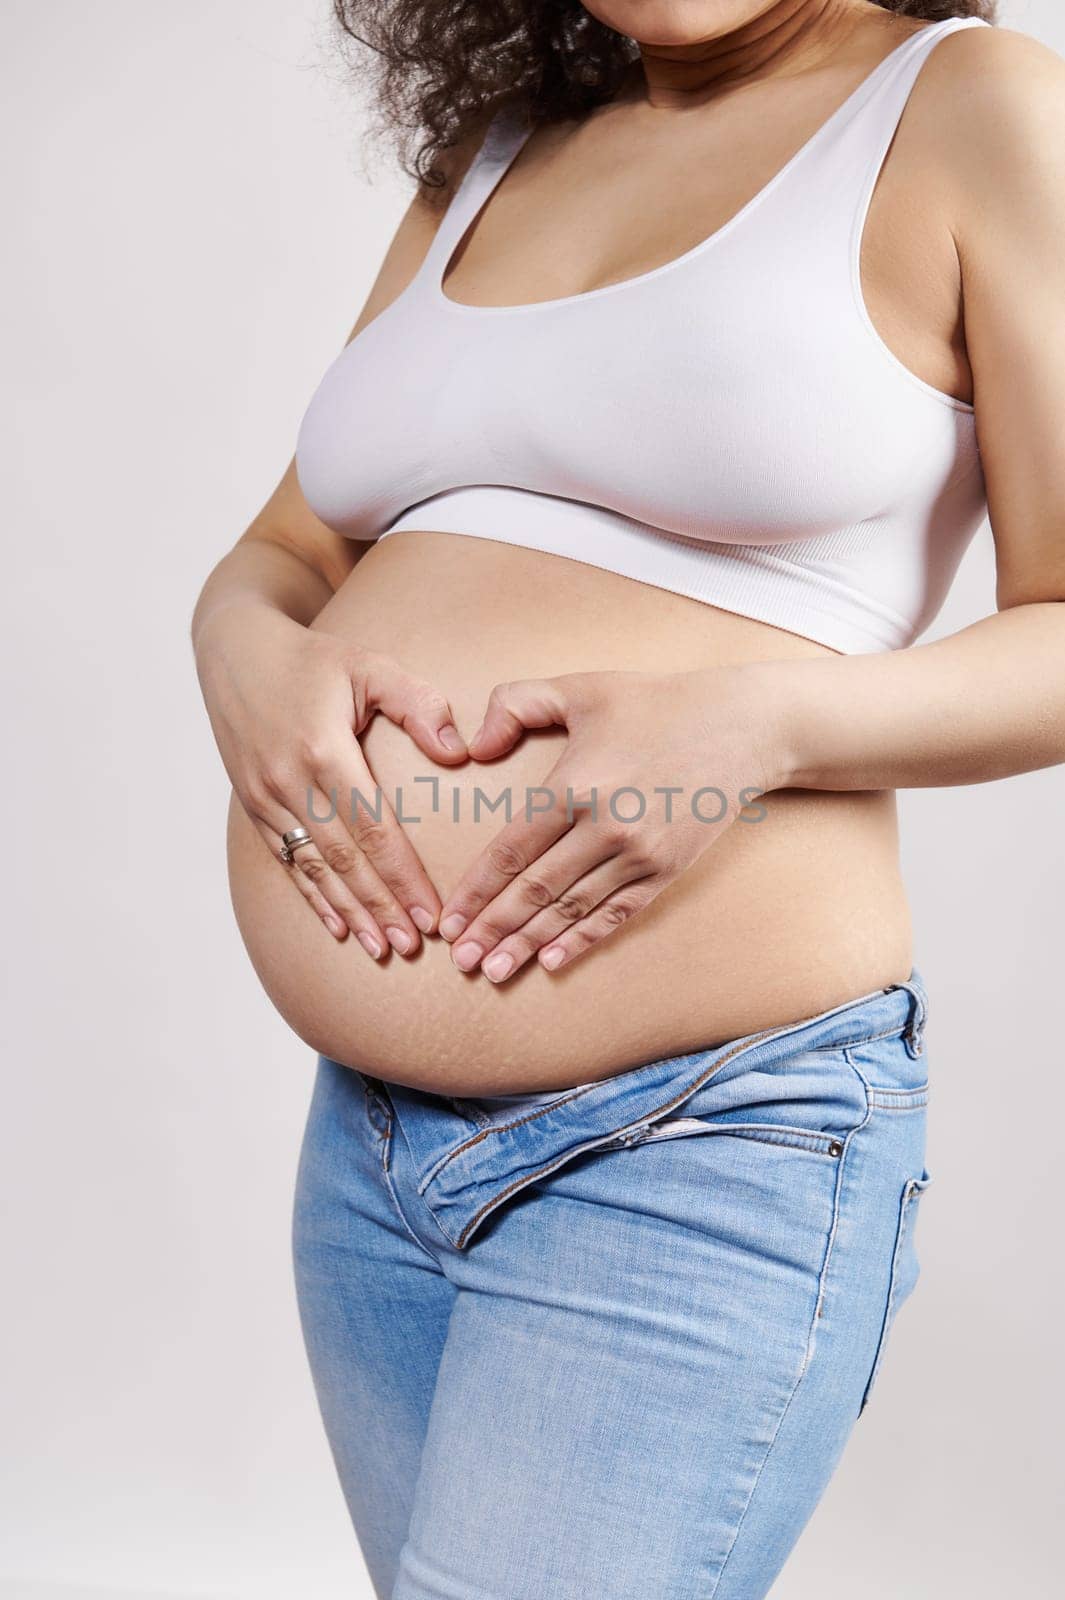 Closeup pregnant woman putting her hands on her naked belly, making heart shape from fingers, isolated on white background. Delightful gravid female expecting a baby. Happy carefree pregnancy 30 week